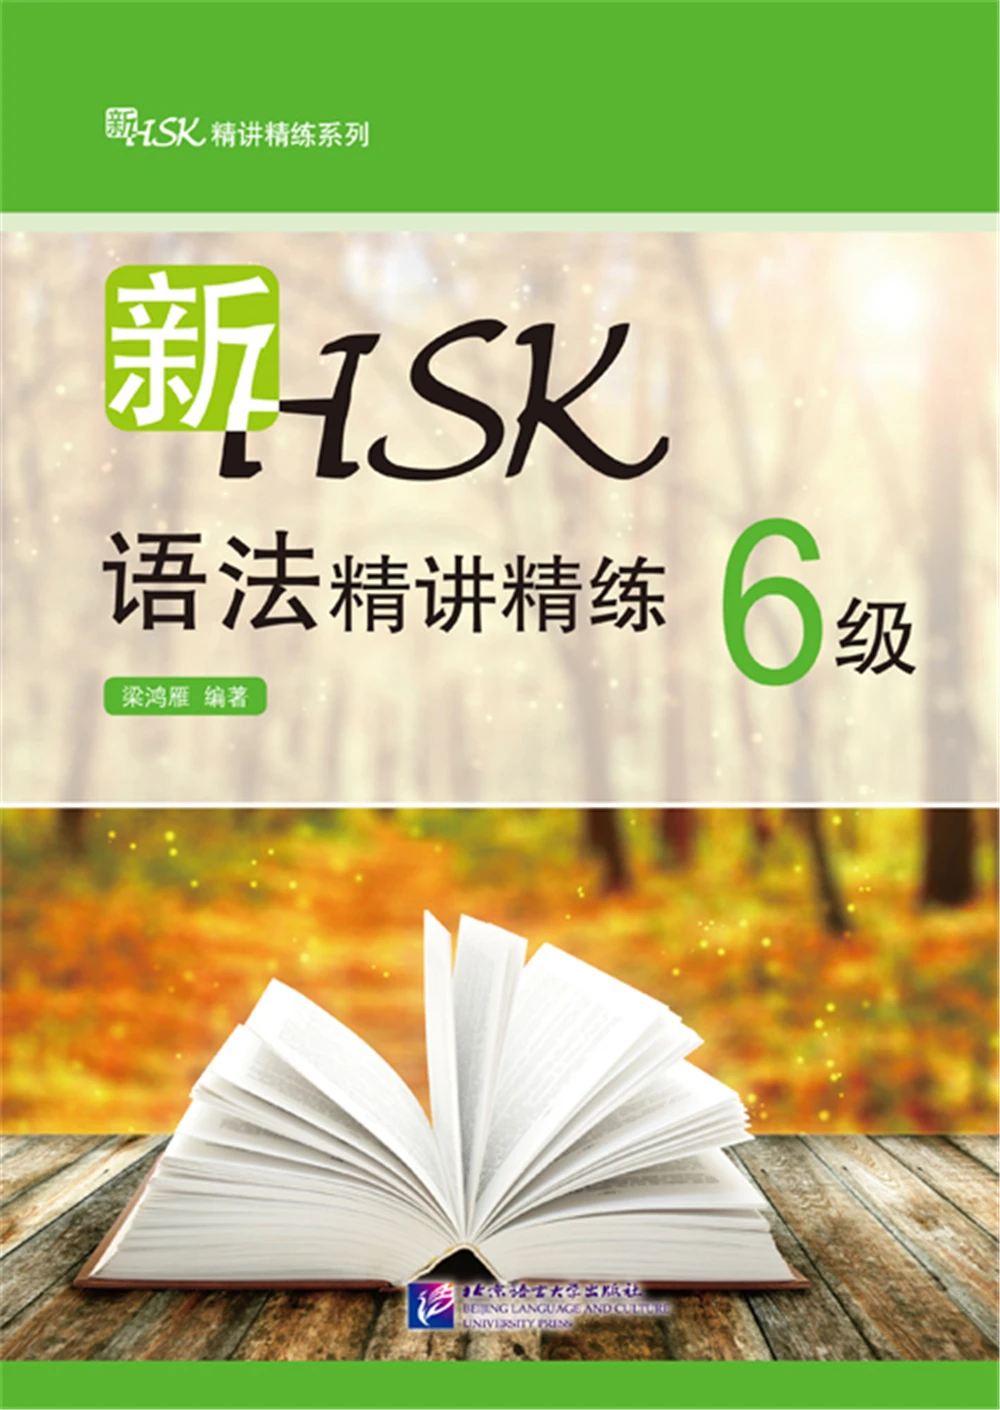 New HSK Grammar Intensive And Concise Level 6